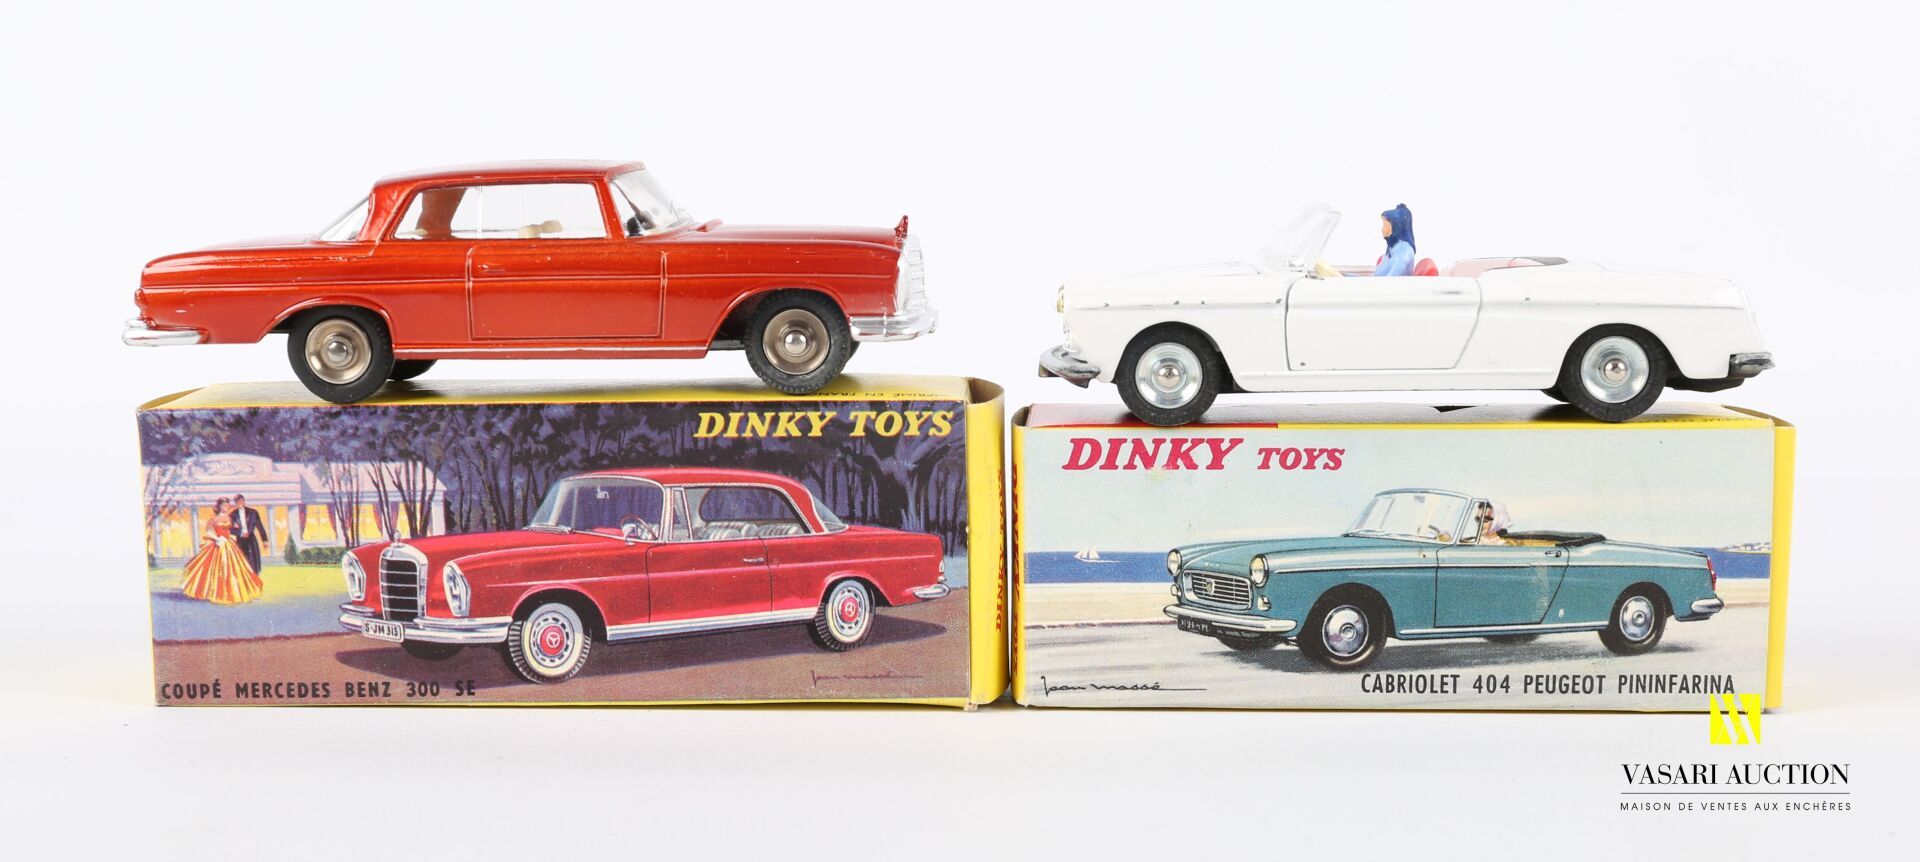 Null DINKY TOYS (FR)

Lot of two vehicles : Peugeot 404 Pininfarina cabriolet Re&hellip;